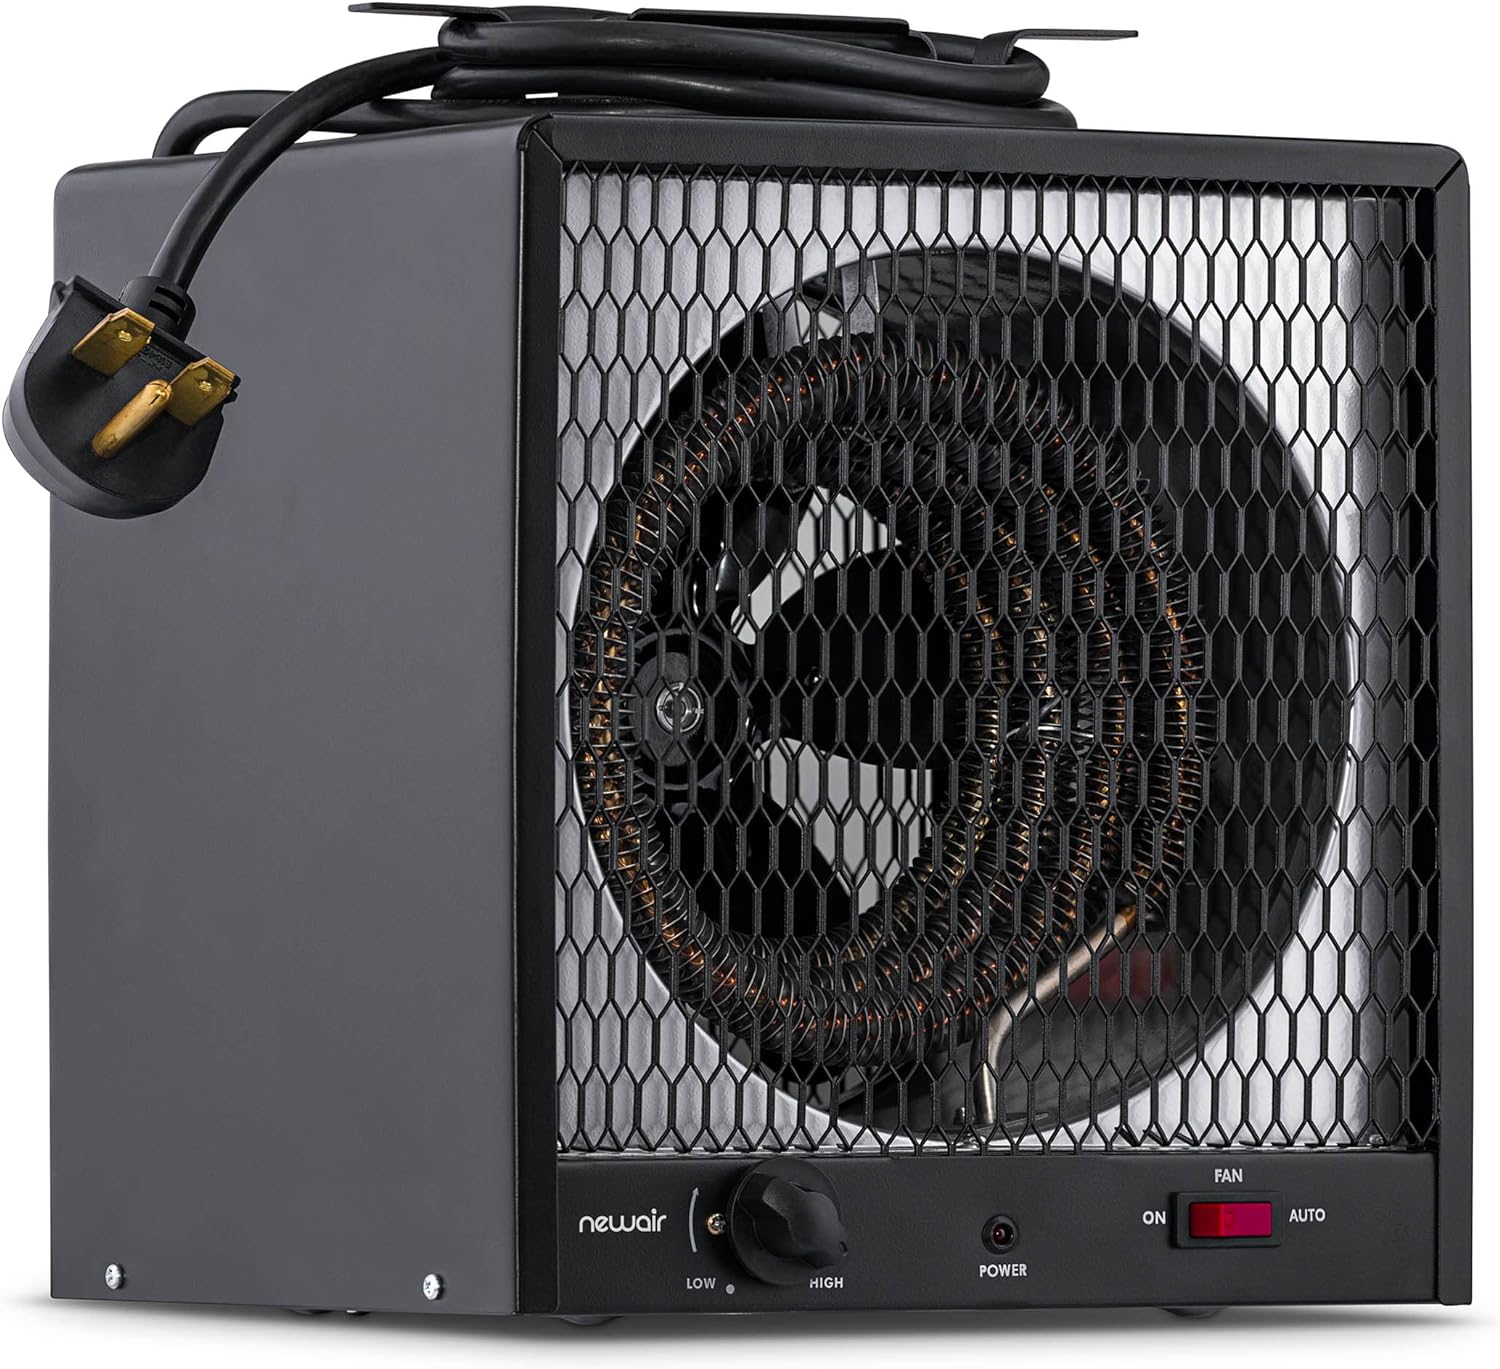 5600W 240V NewAir G56 Portable Electric Garage Heater w/ 6' Cord & Carrying Handle $80 + Free Shipping